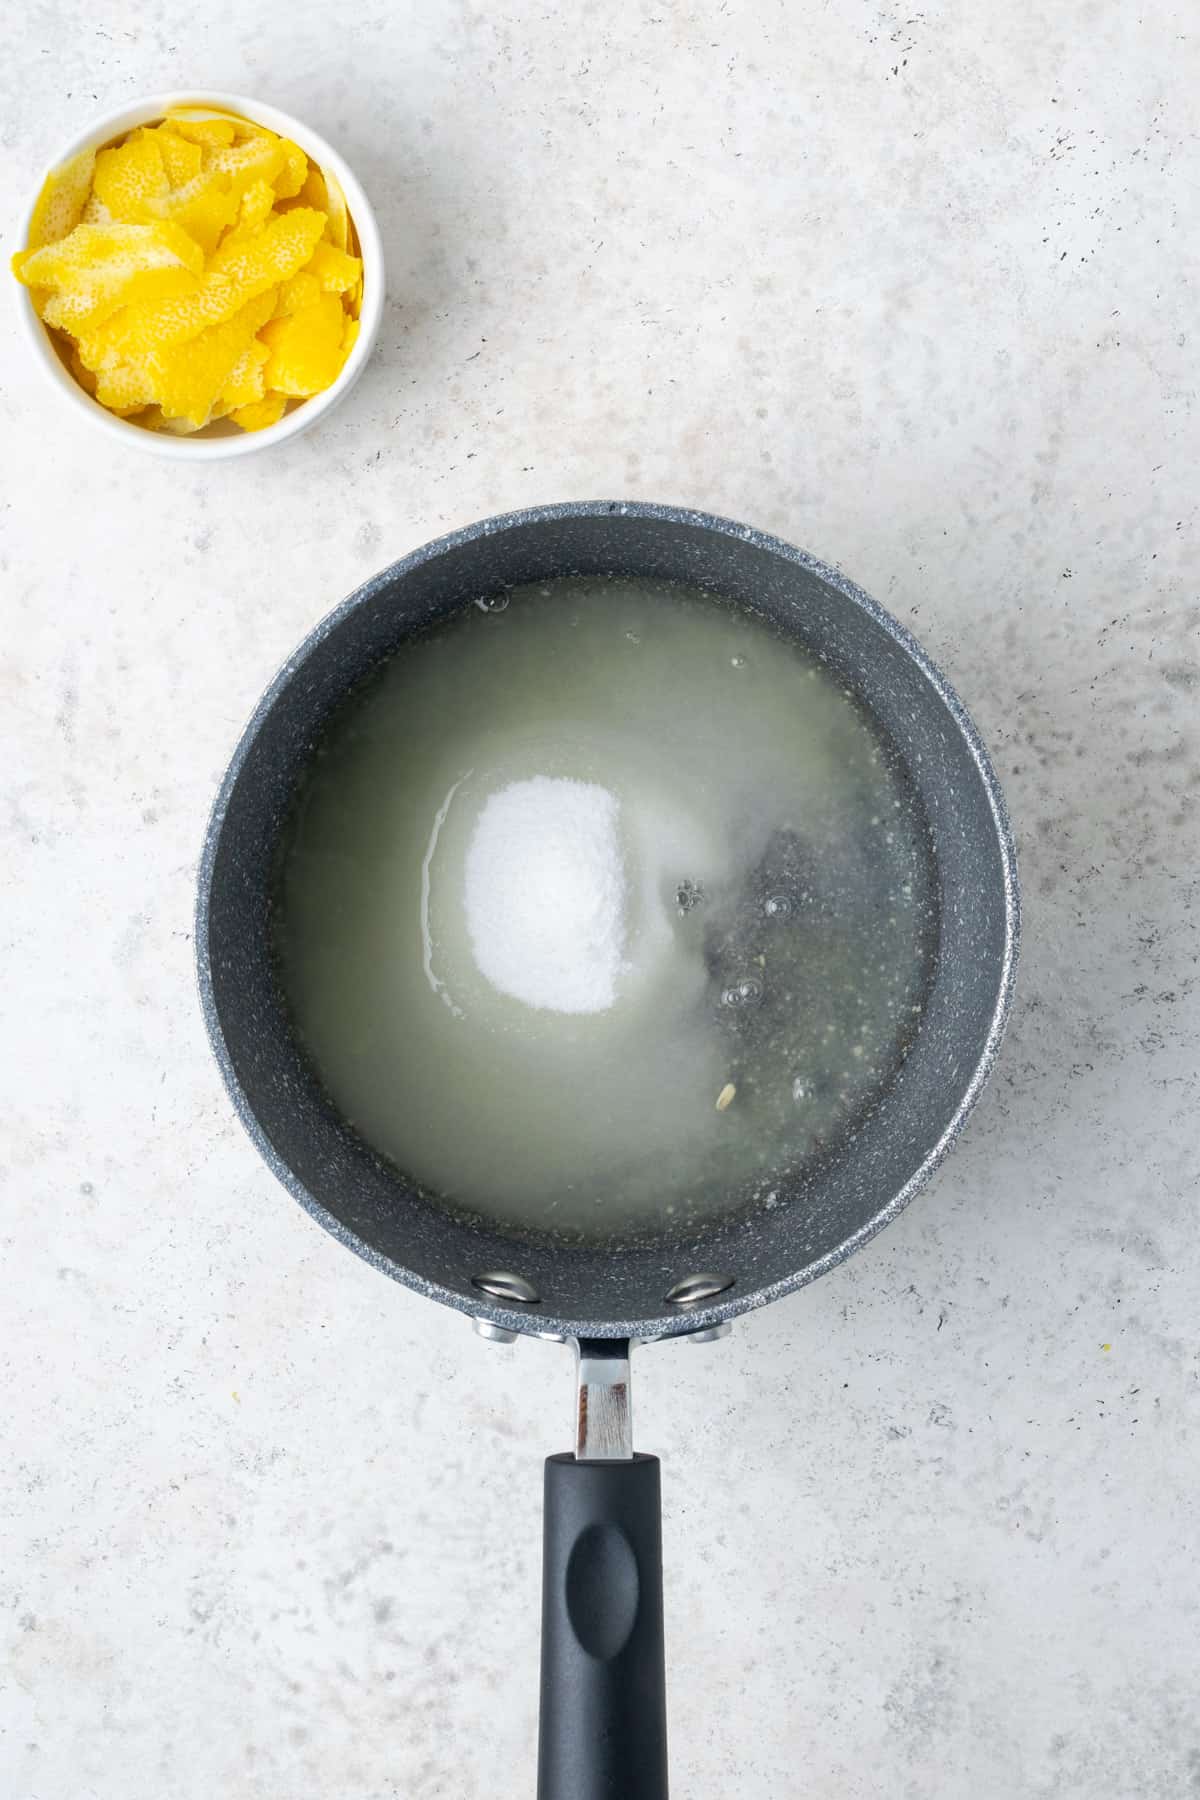 Lemon juice, water and sugar combined in a small saucepan.